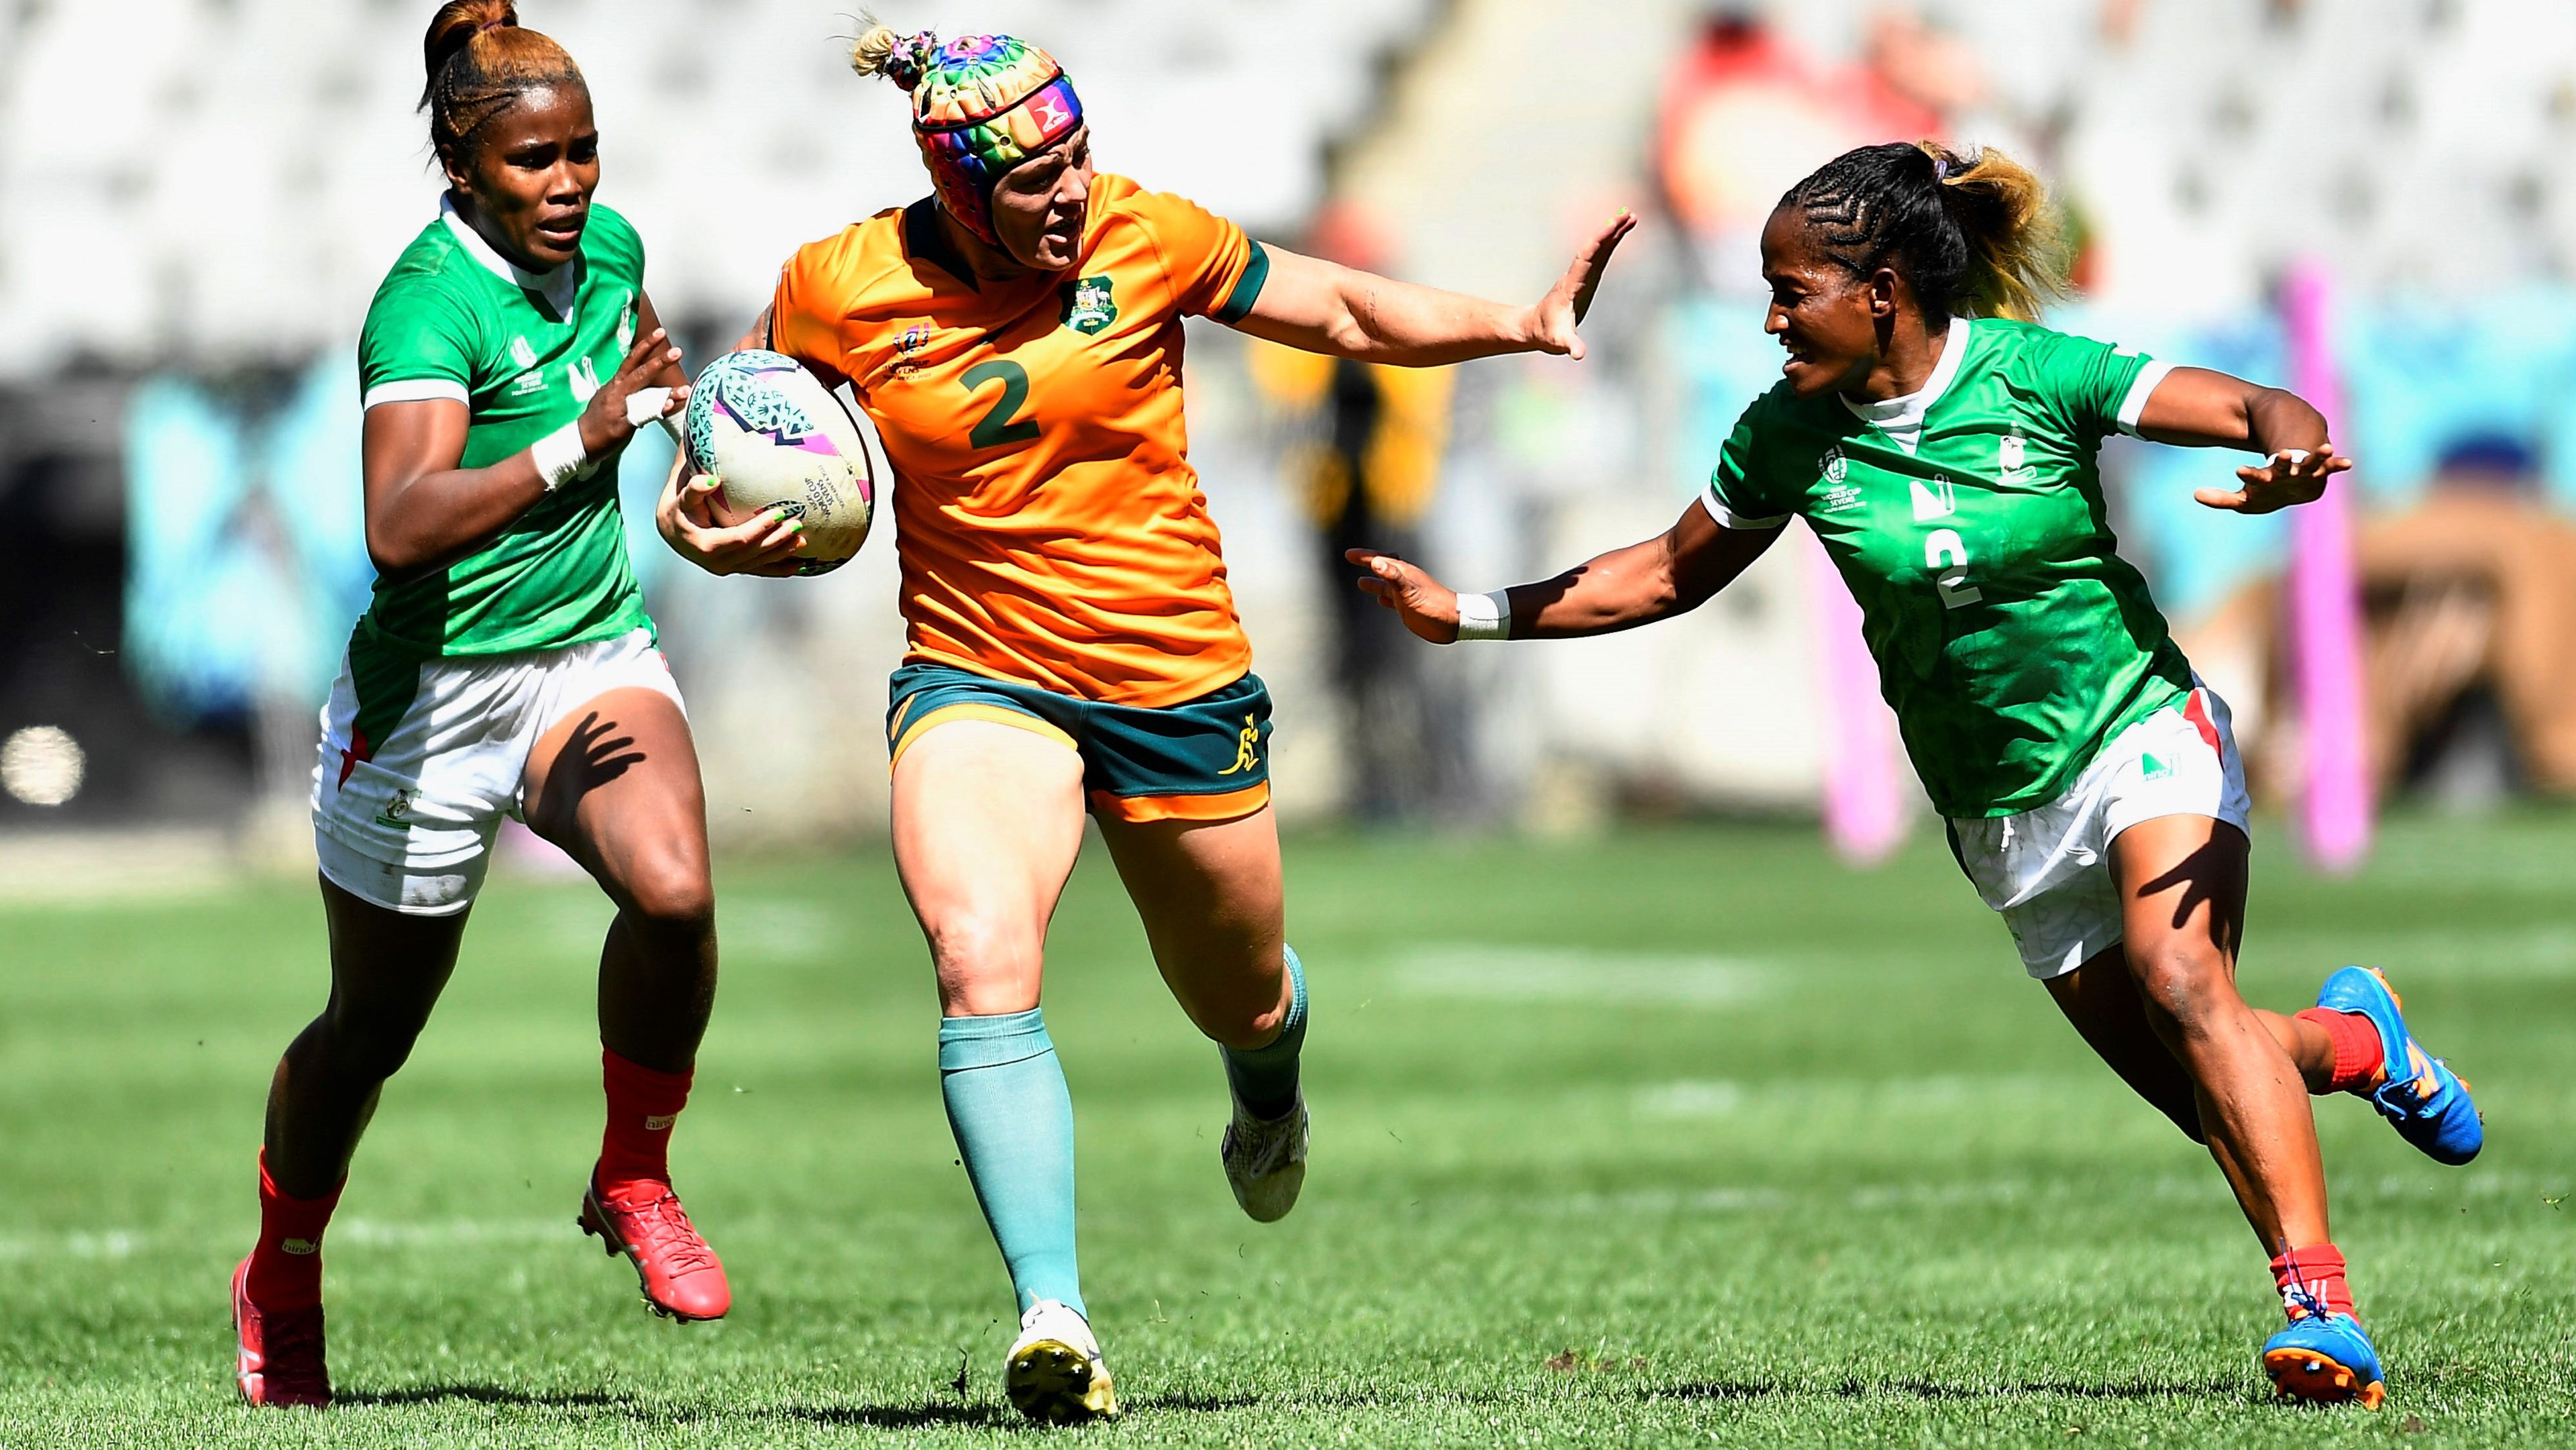 Sharni Williams fends off a Madagascar placer during the Women&#x27;s Rugby World Cup Sevens in Cape Town.